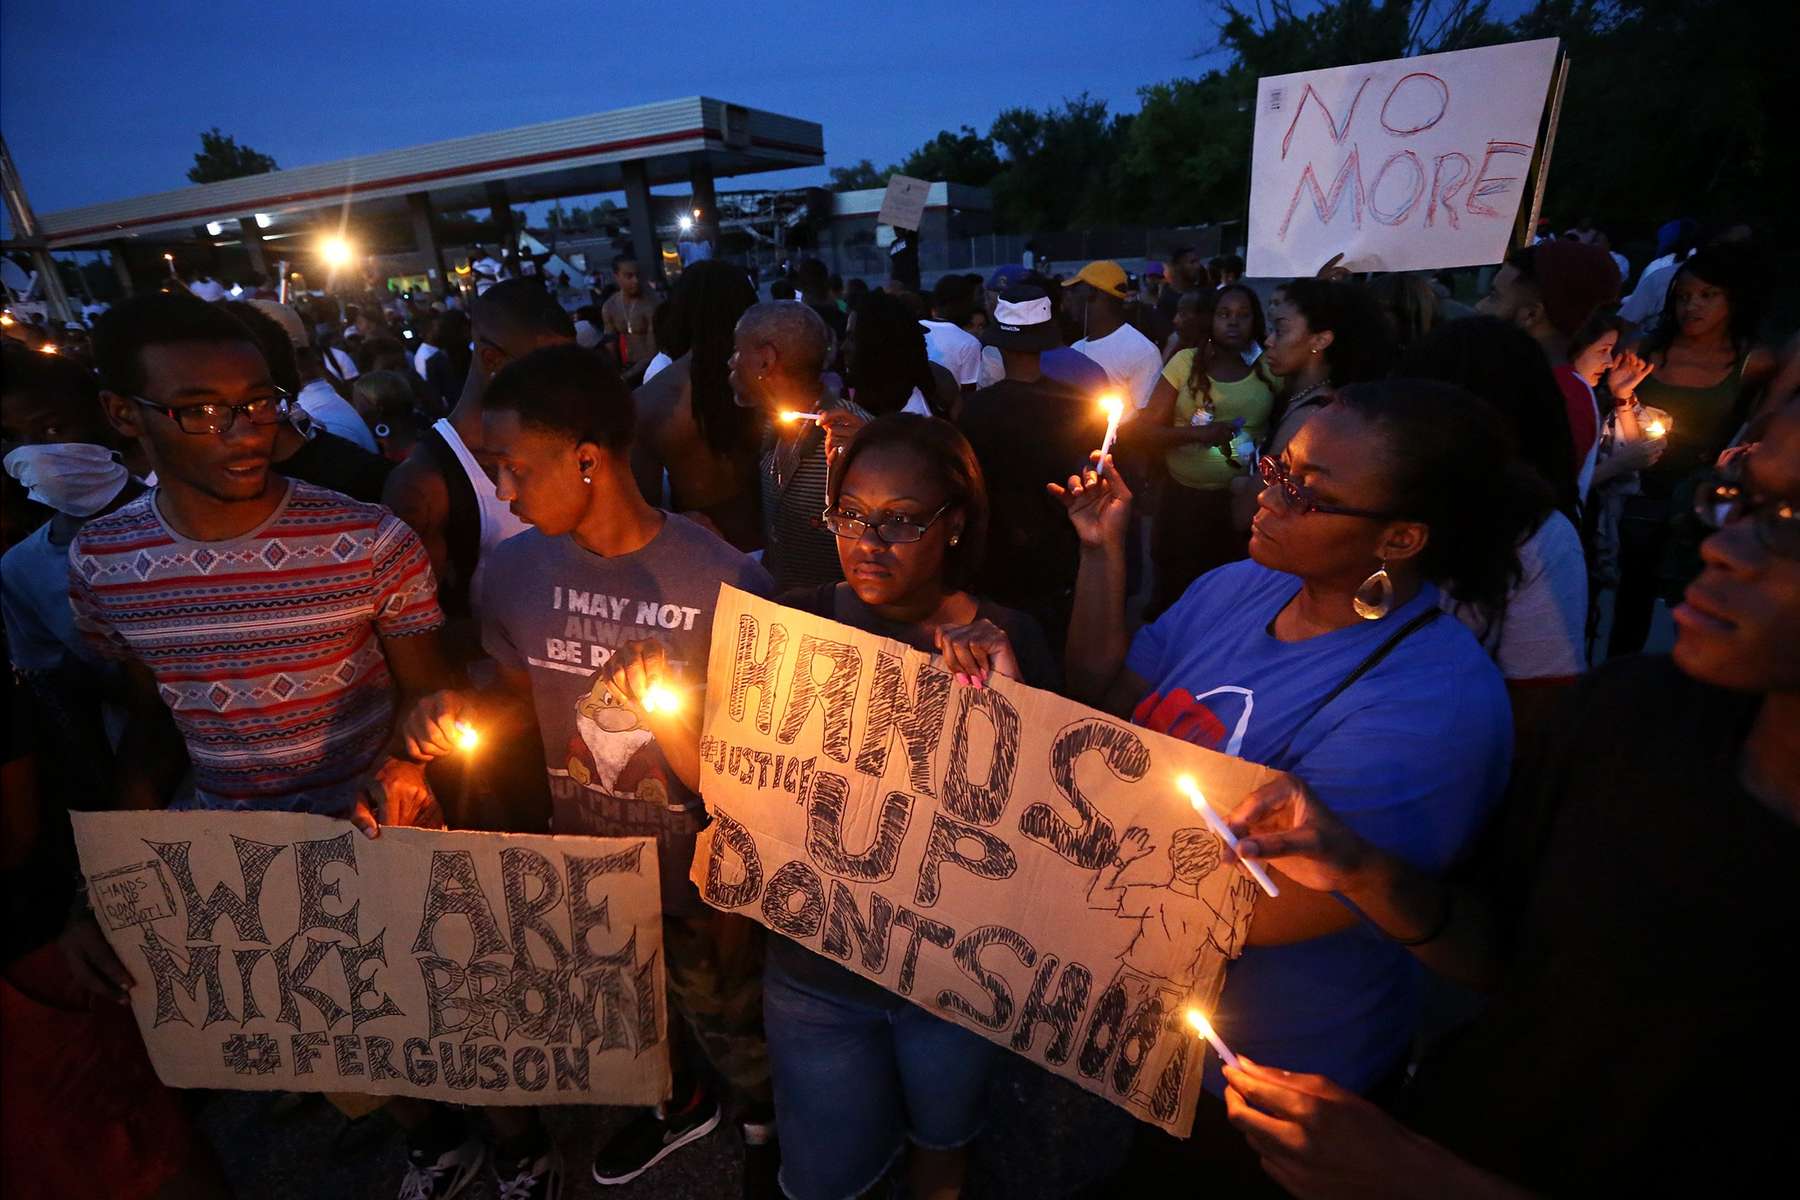 Keith Lovett (left), Melik Smith, Victoria Smith, Linda Smith and Antonio McDonald(right) hold candles during a gathering of people at the QuikTrip in Ferguson Thursday, Aug. 14, 2014.  Thursday marked the first peaceful night protests since Michael Brown was shot and killed by a police officer.